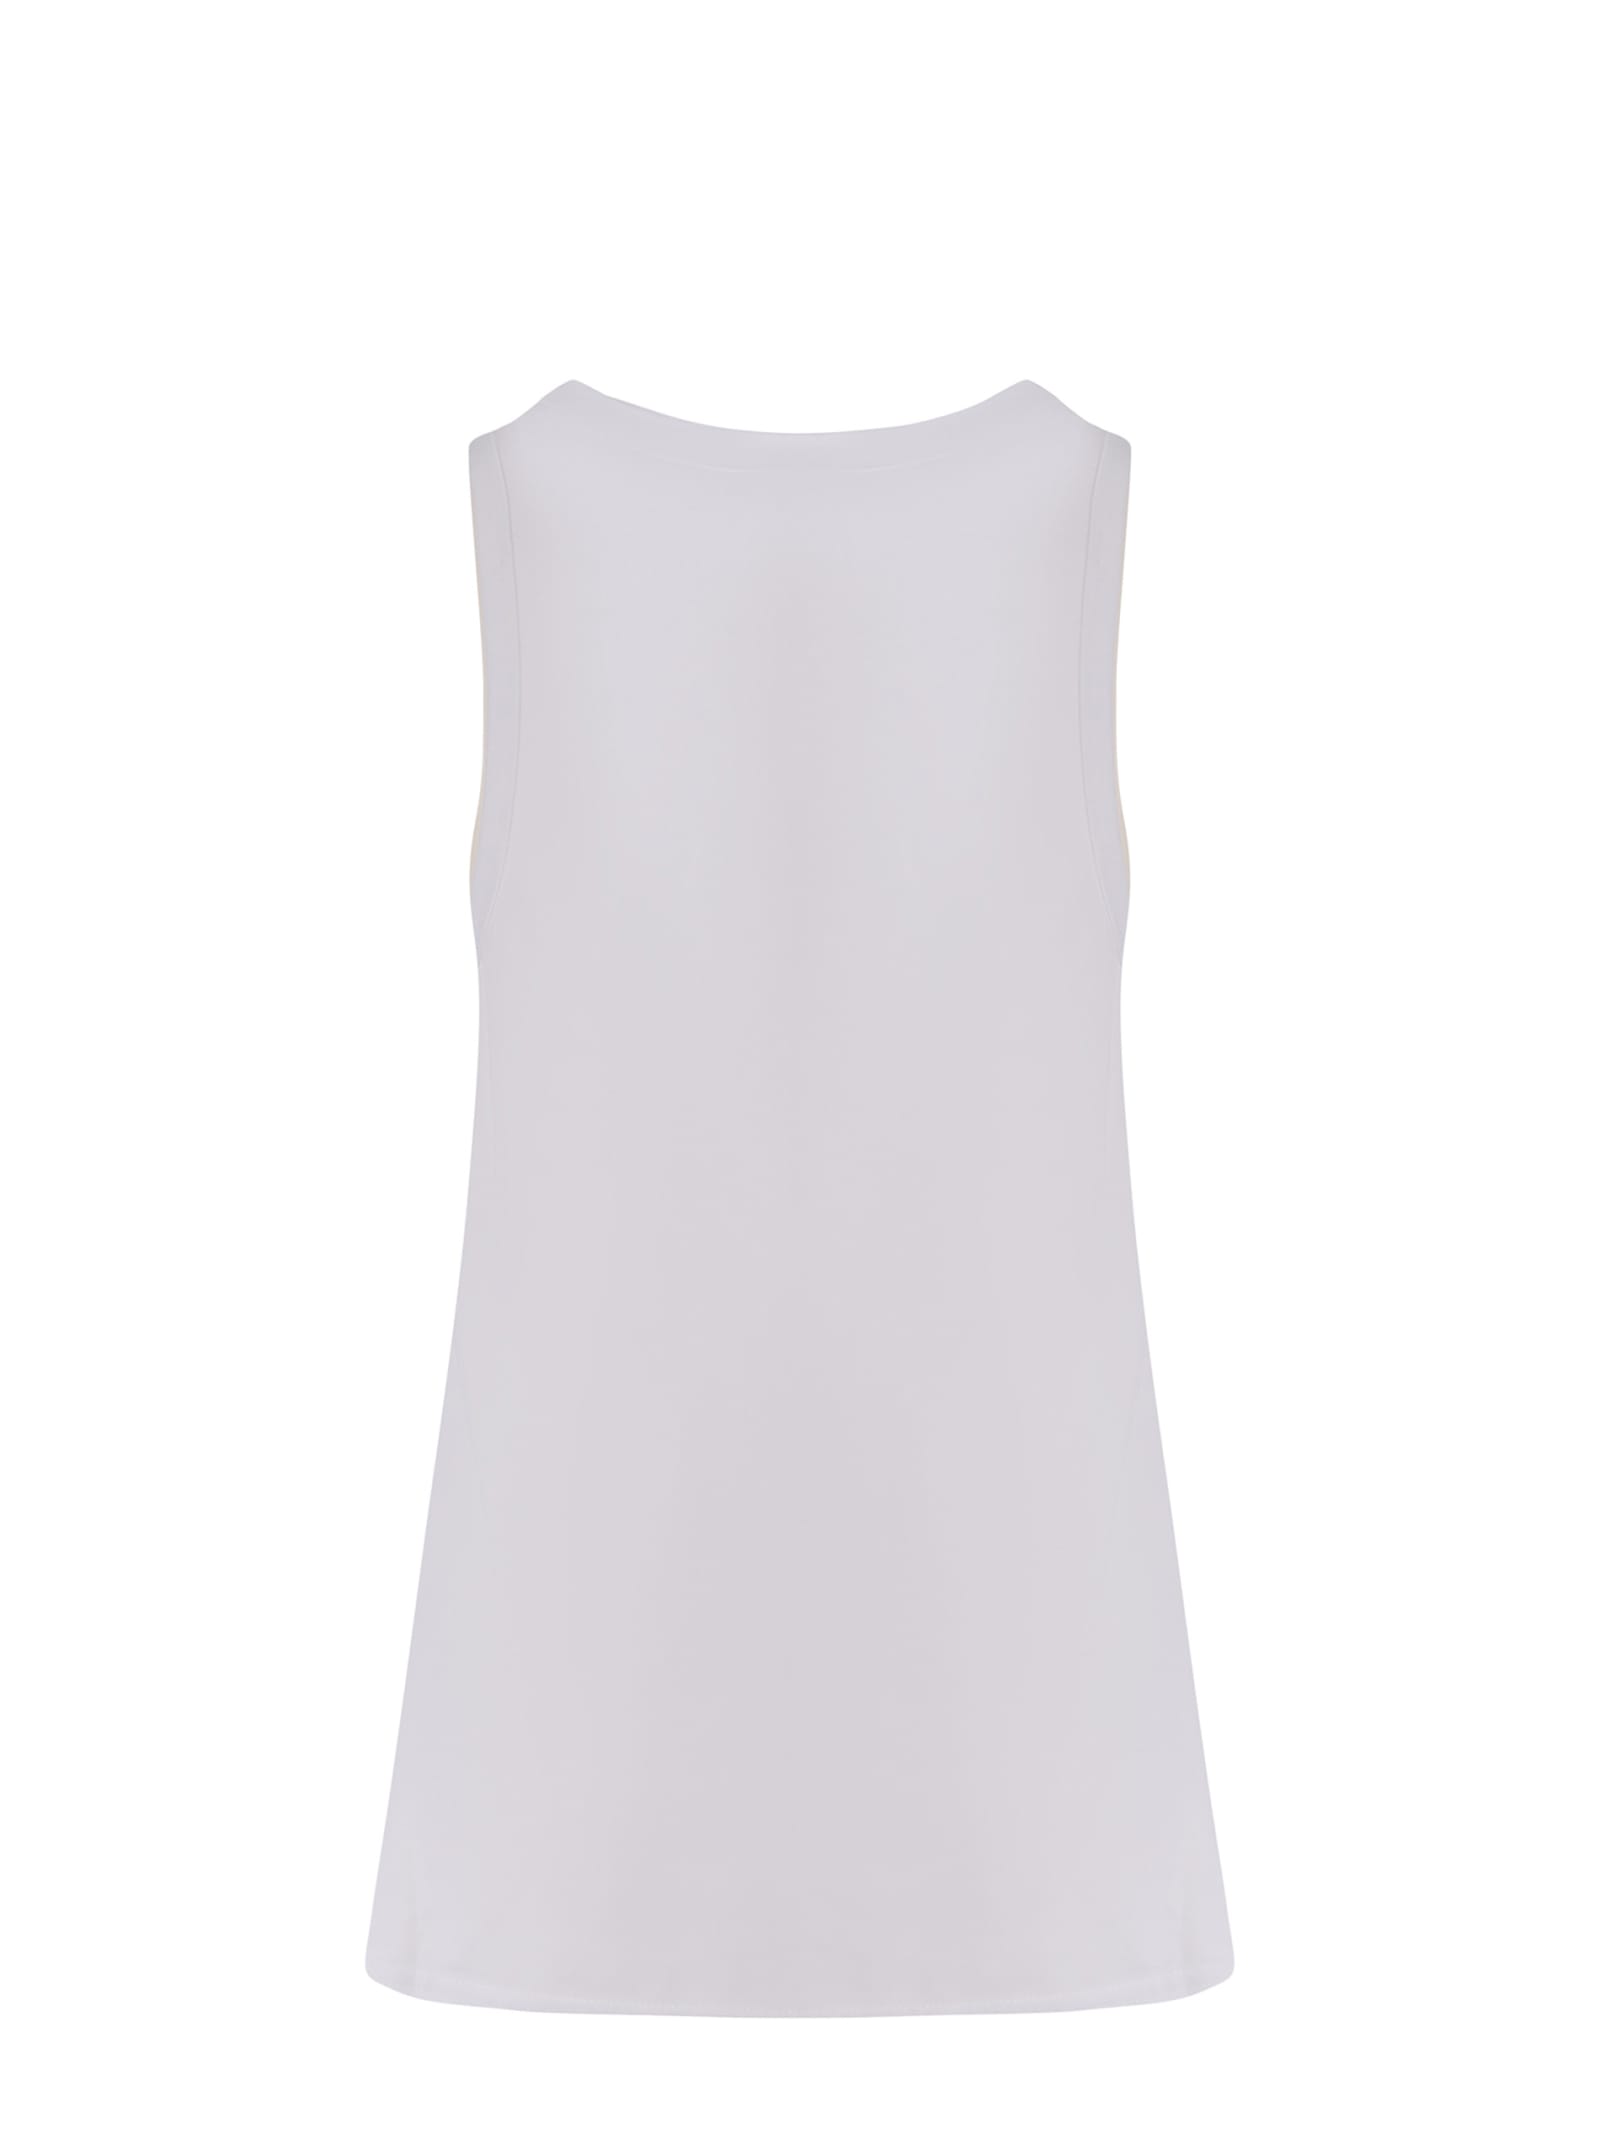 Shop Fiorucci Tank Top  Angels Made Of Cotton In Bianco